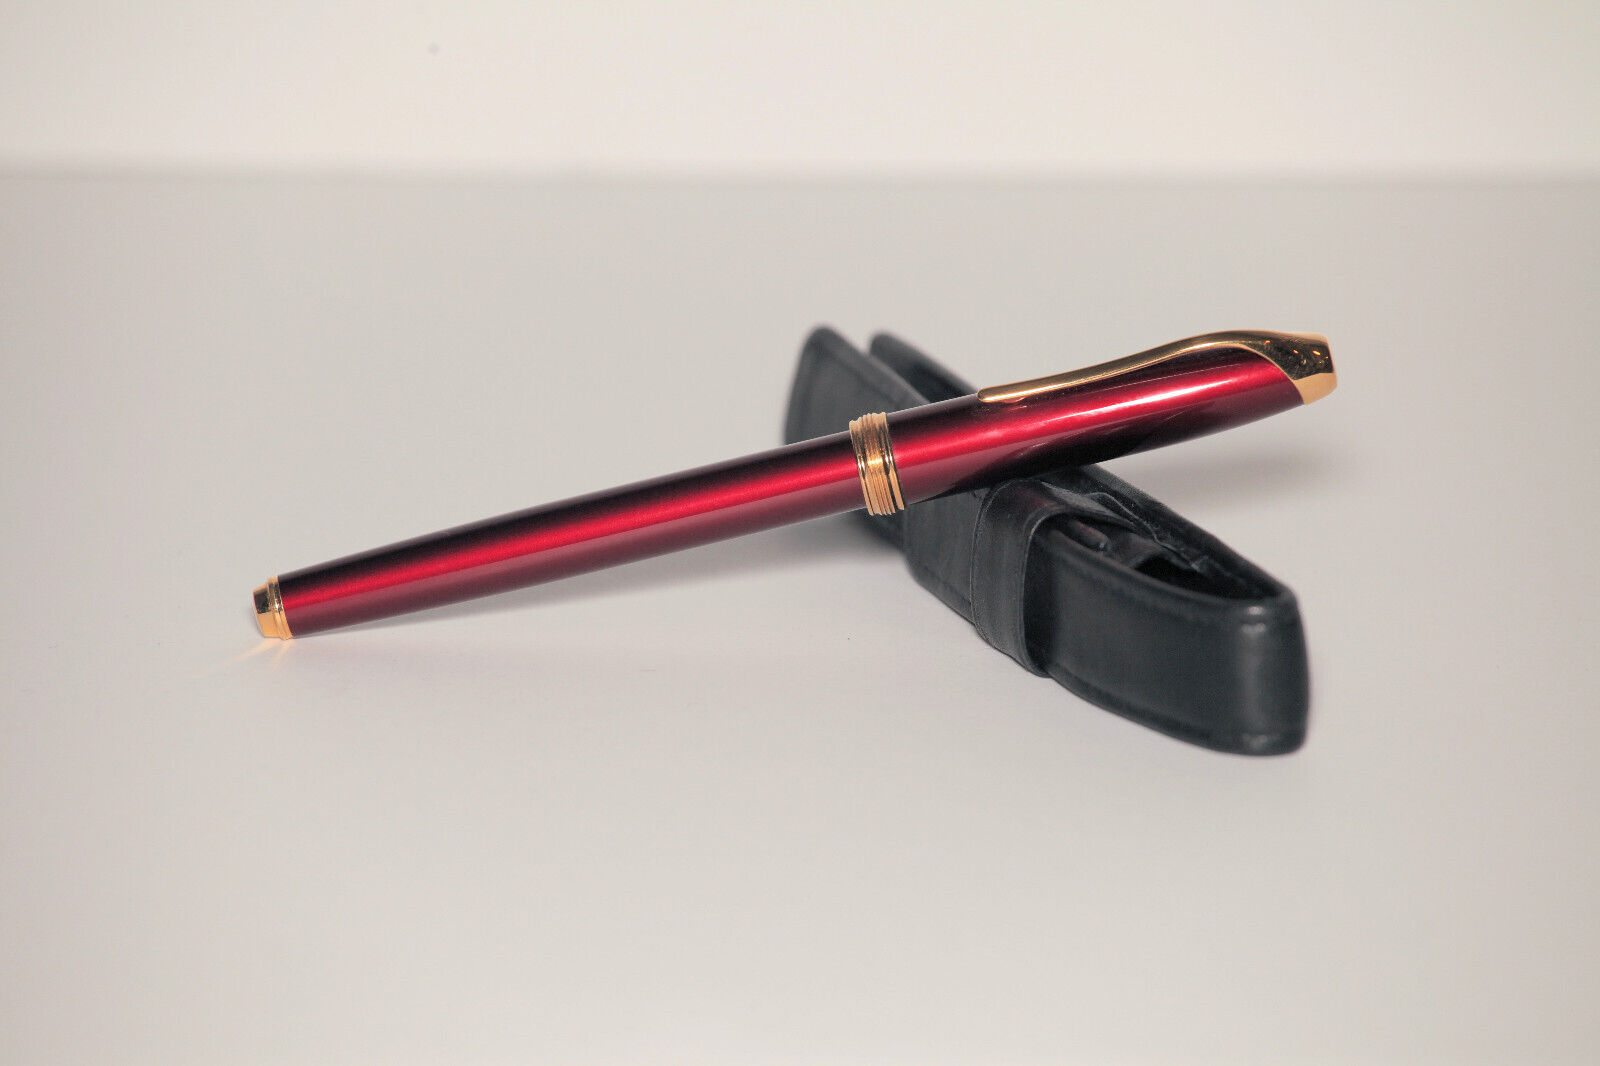 Vintage Cross Pinnacle Bordeaux (red) Lacquer rollerball Pen with gold accents